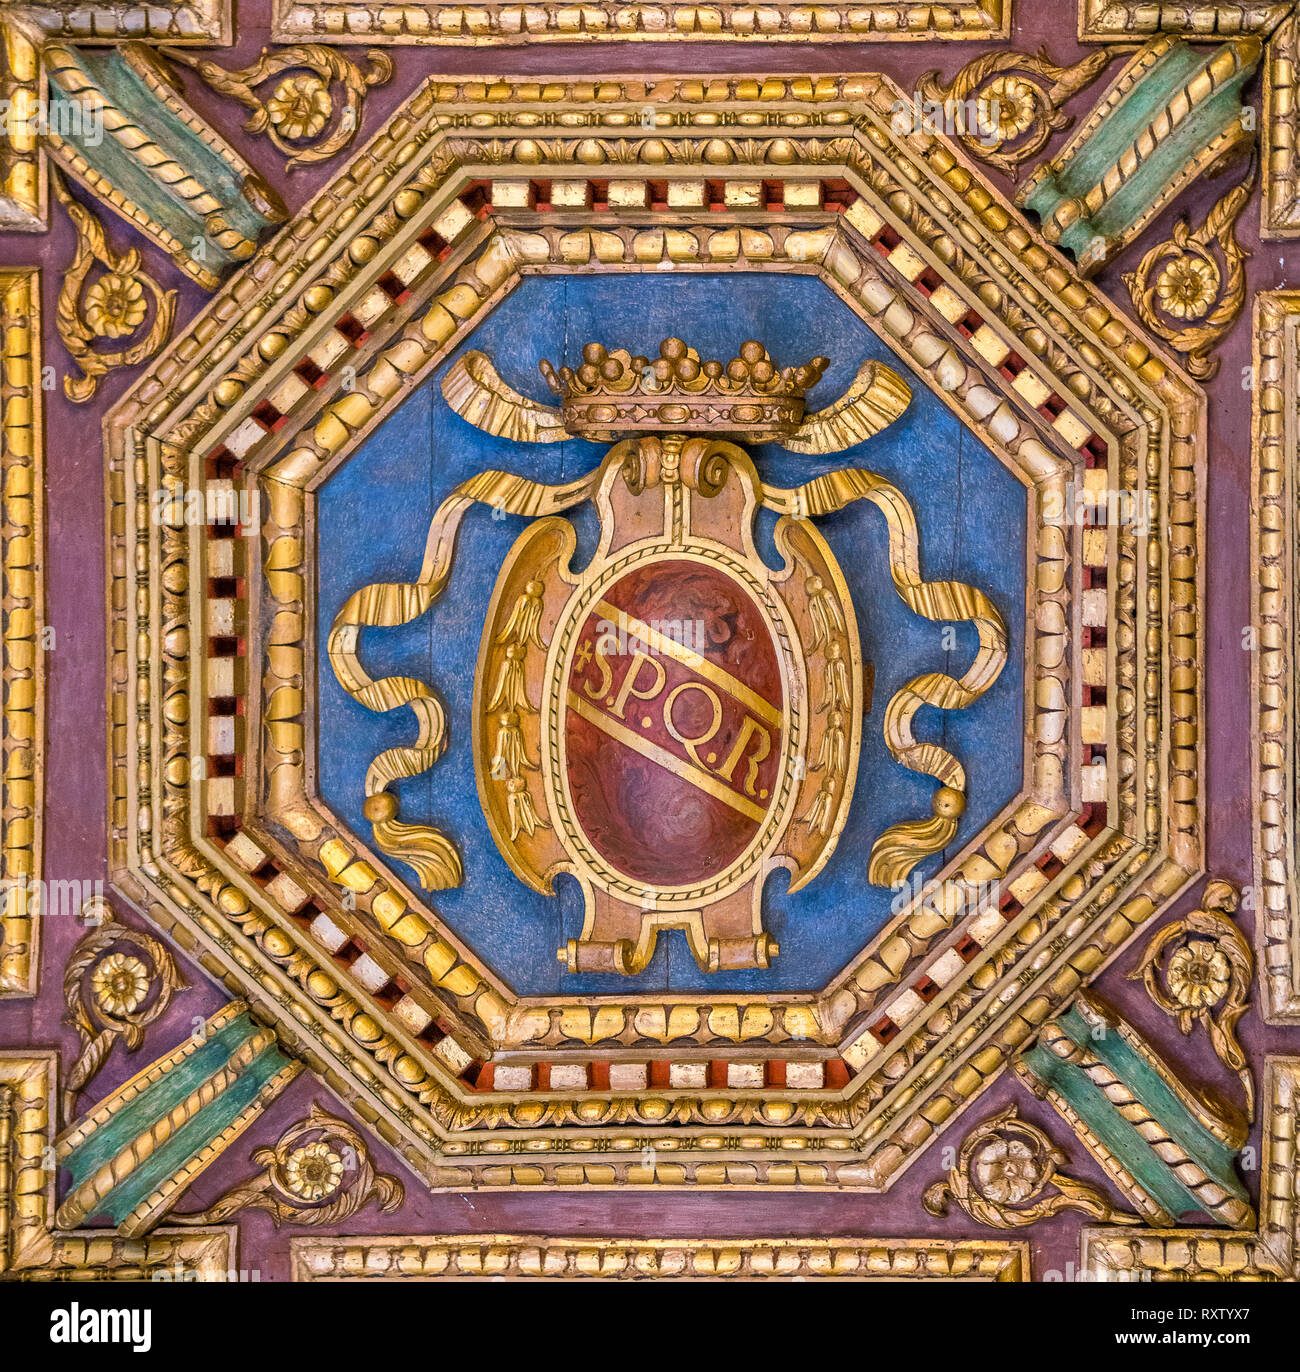 Wooden decoration with SPQR coat of arms in the ceiling of the Capitoline Museums in Rome, Italy. Stock Photo